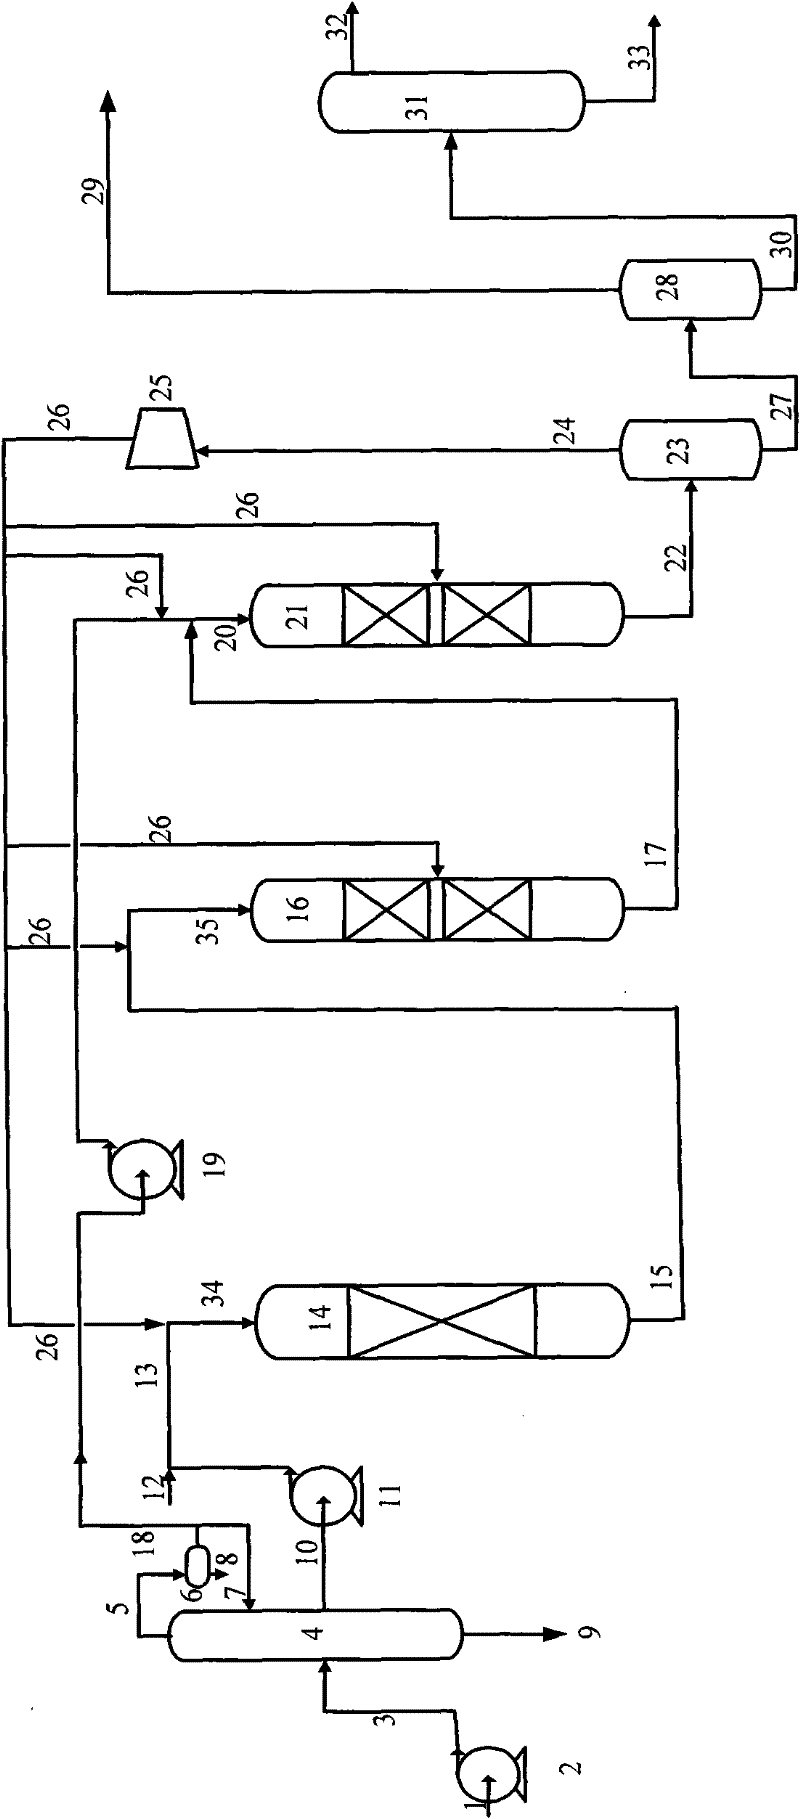 Method for producing gasoline and diesel oil through hydrogenation of coal tar